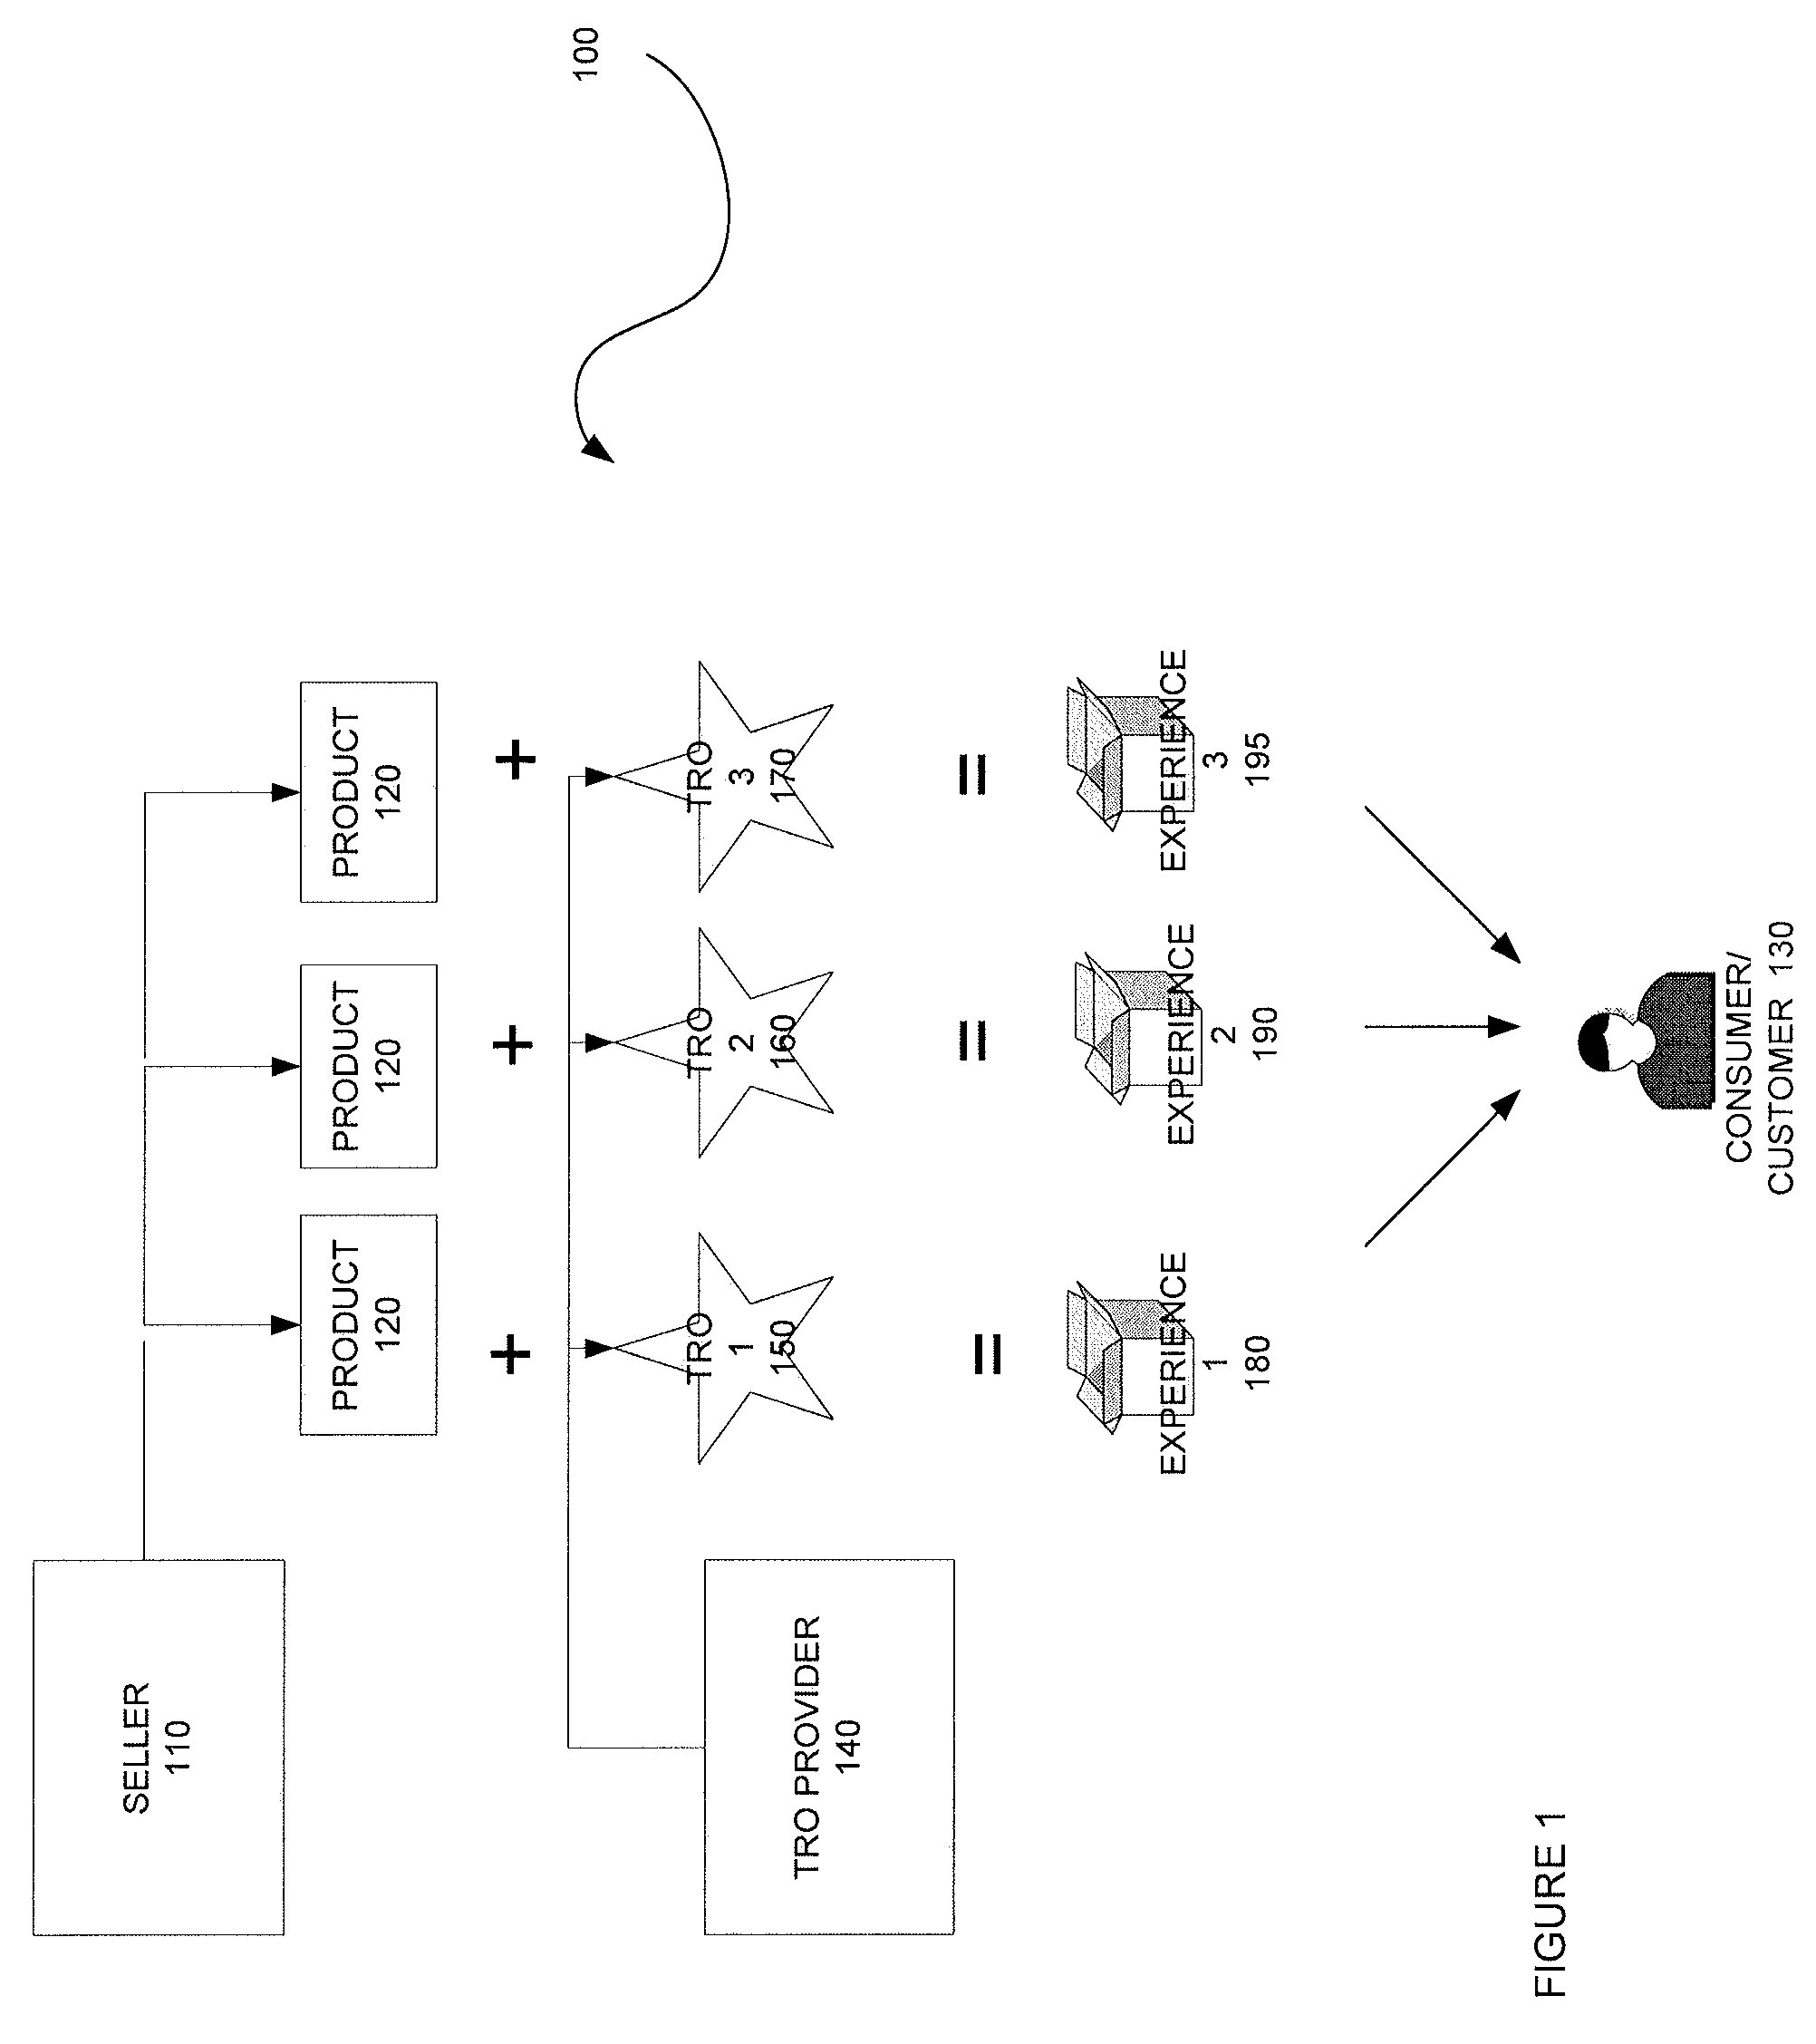 Method, system and components for obtaining, evaluating and/or utilizing seller, buyer and transaction data